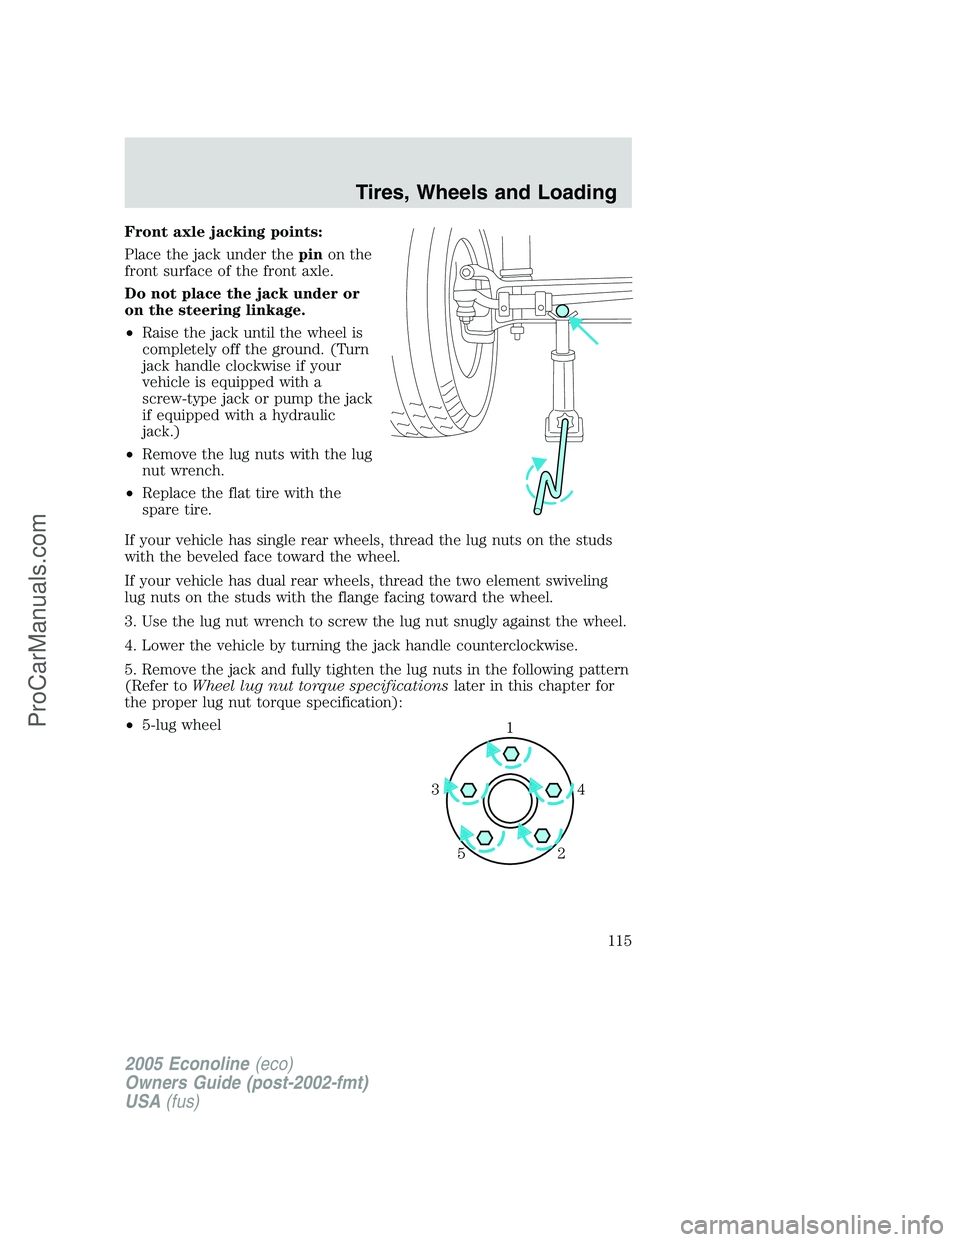 FORD E-250 2005  Owners Manual Front axle jacking points:
Place the jack under thepinon the
front surface of the front axle.
Do not place the jack under or
on the steering linkage.
•Raise the jack until the wheel is
completely of